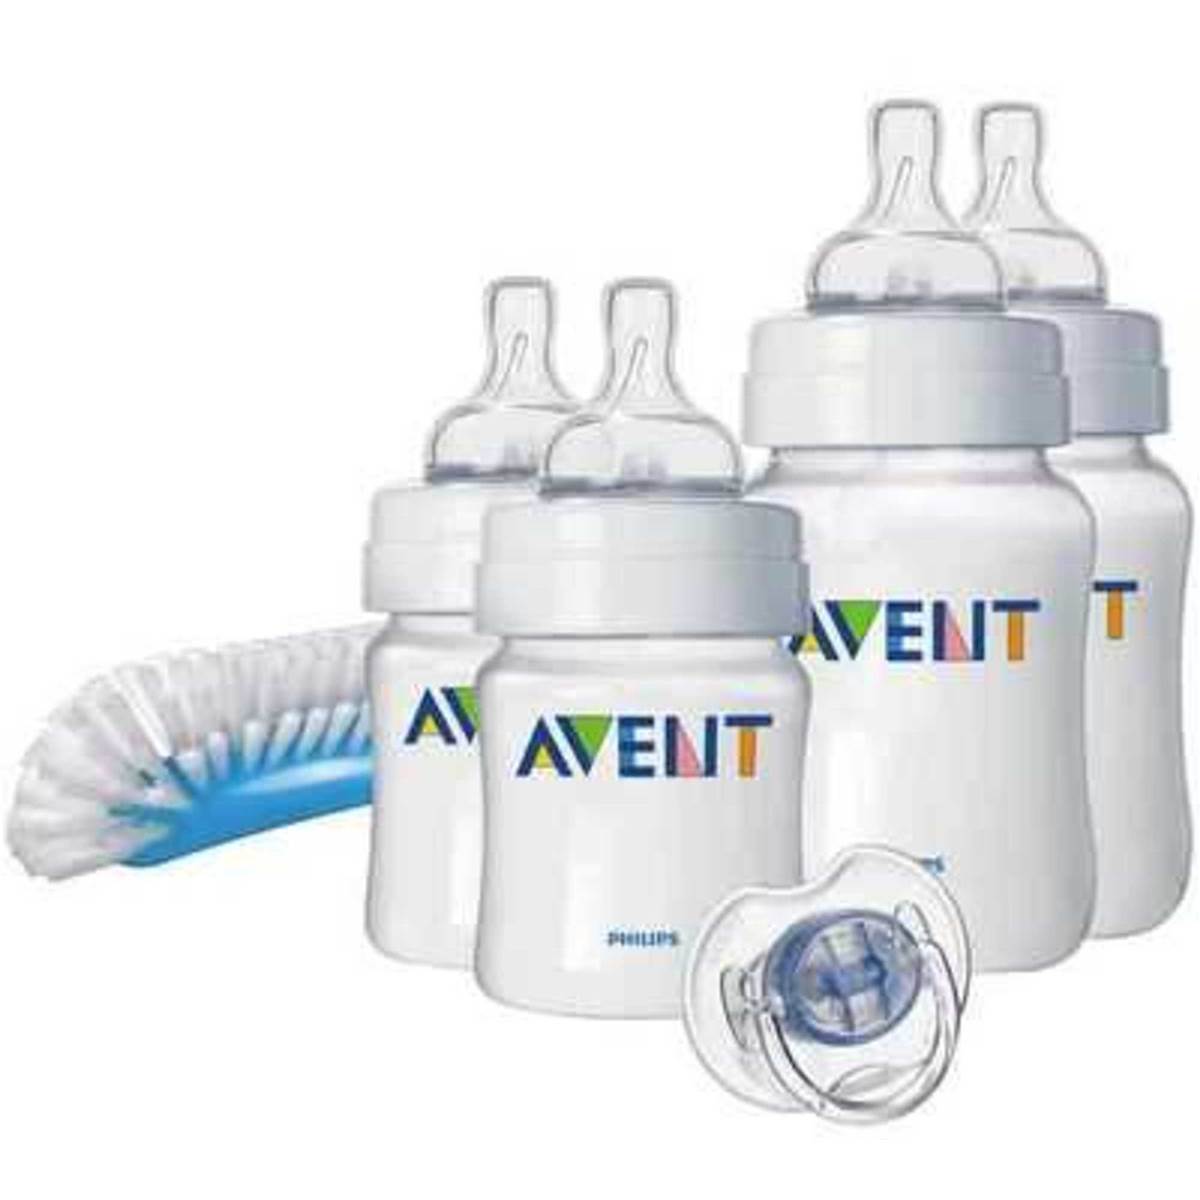 avent woolworths